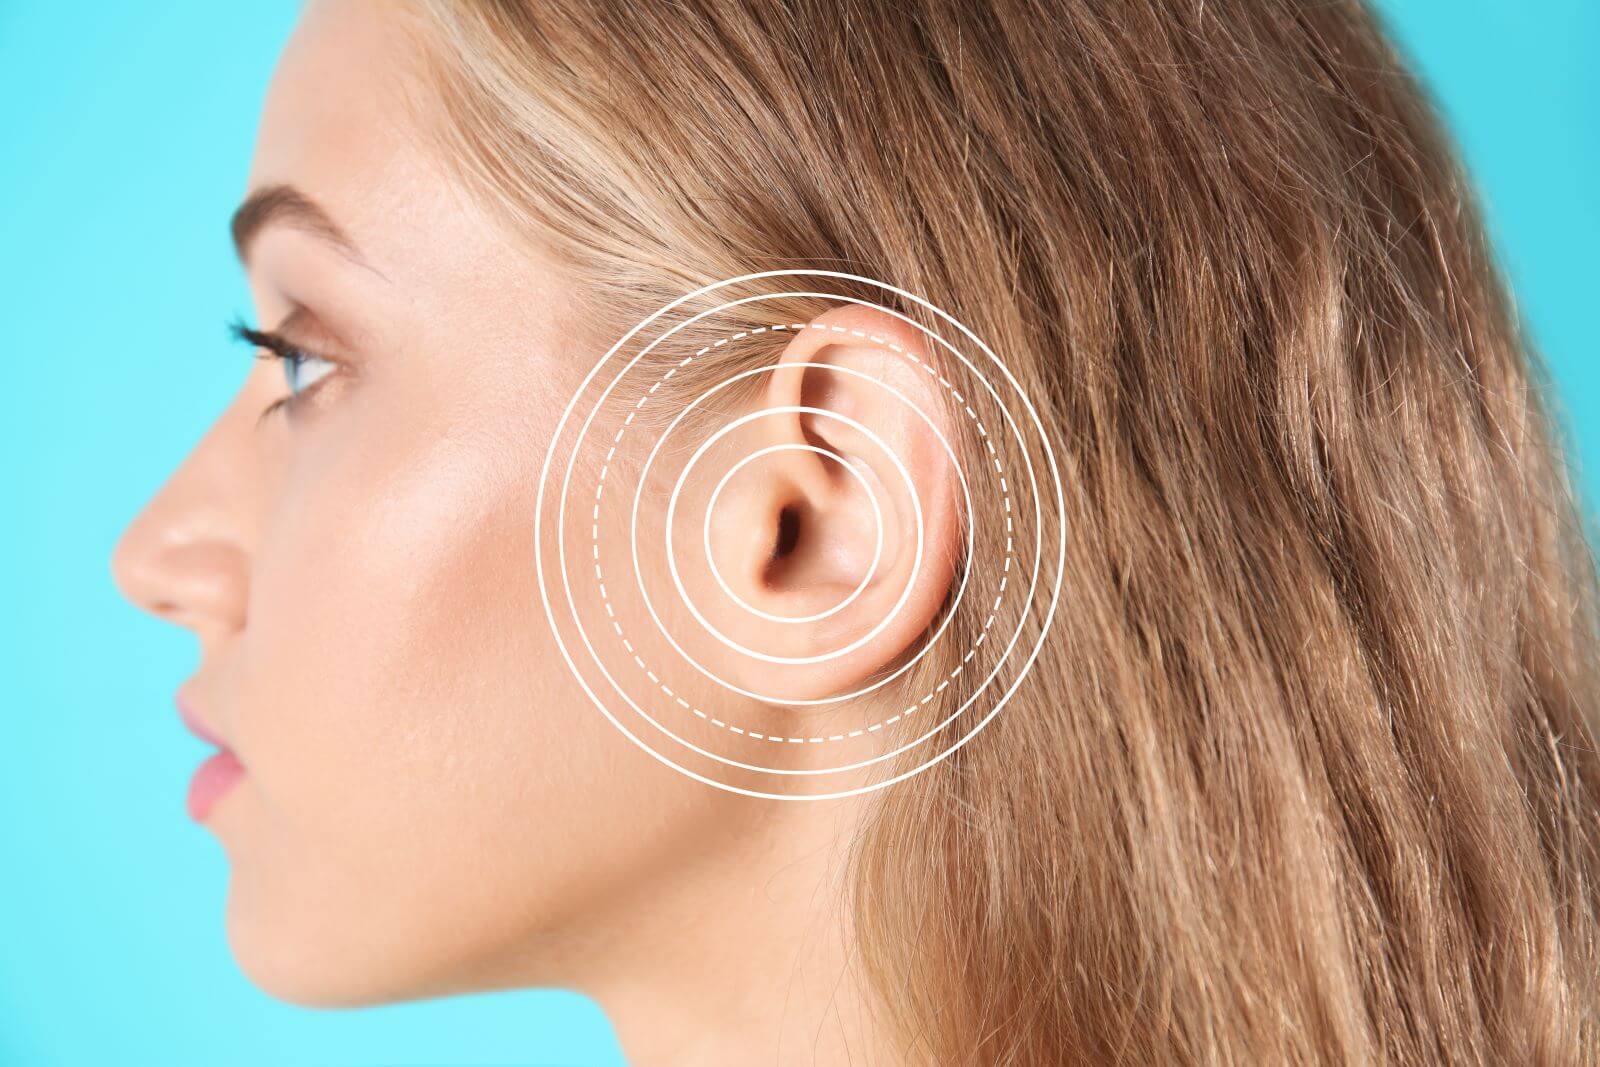 Side view of woman with circles overlaying her ear